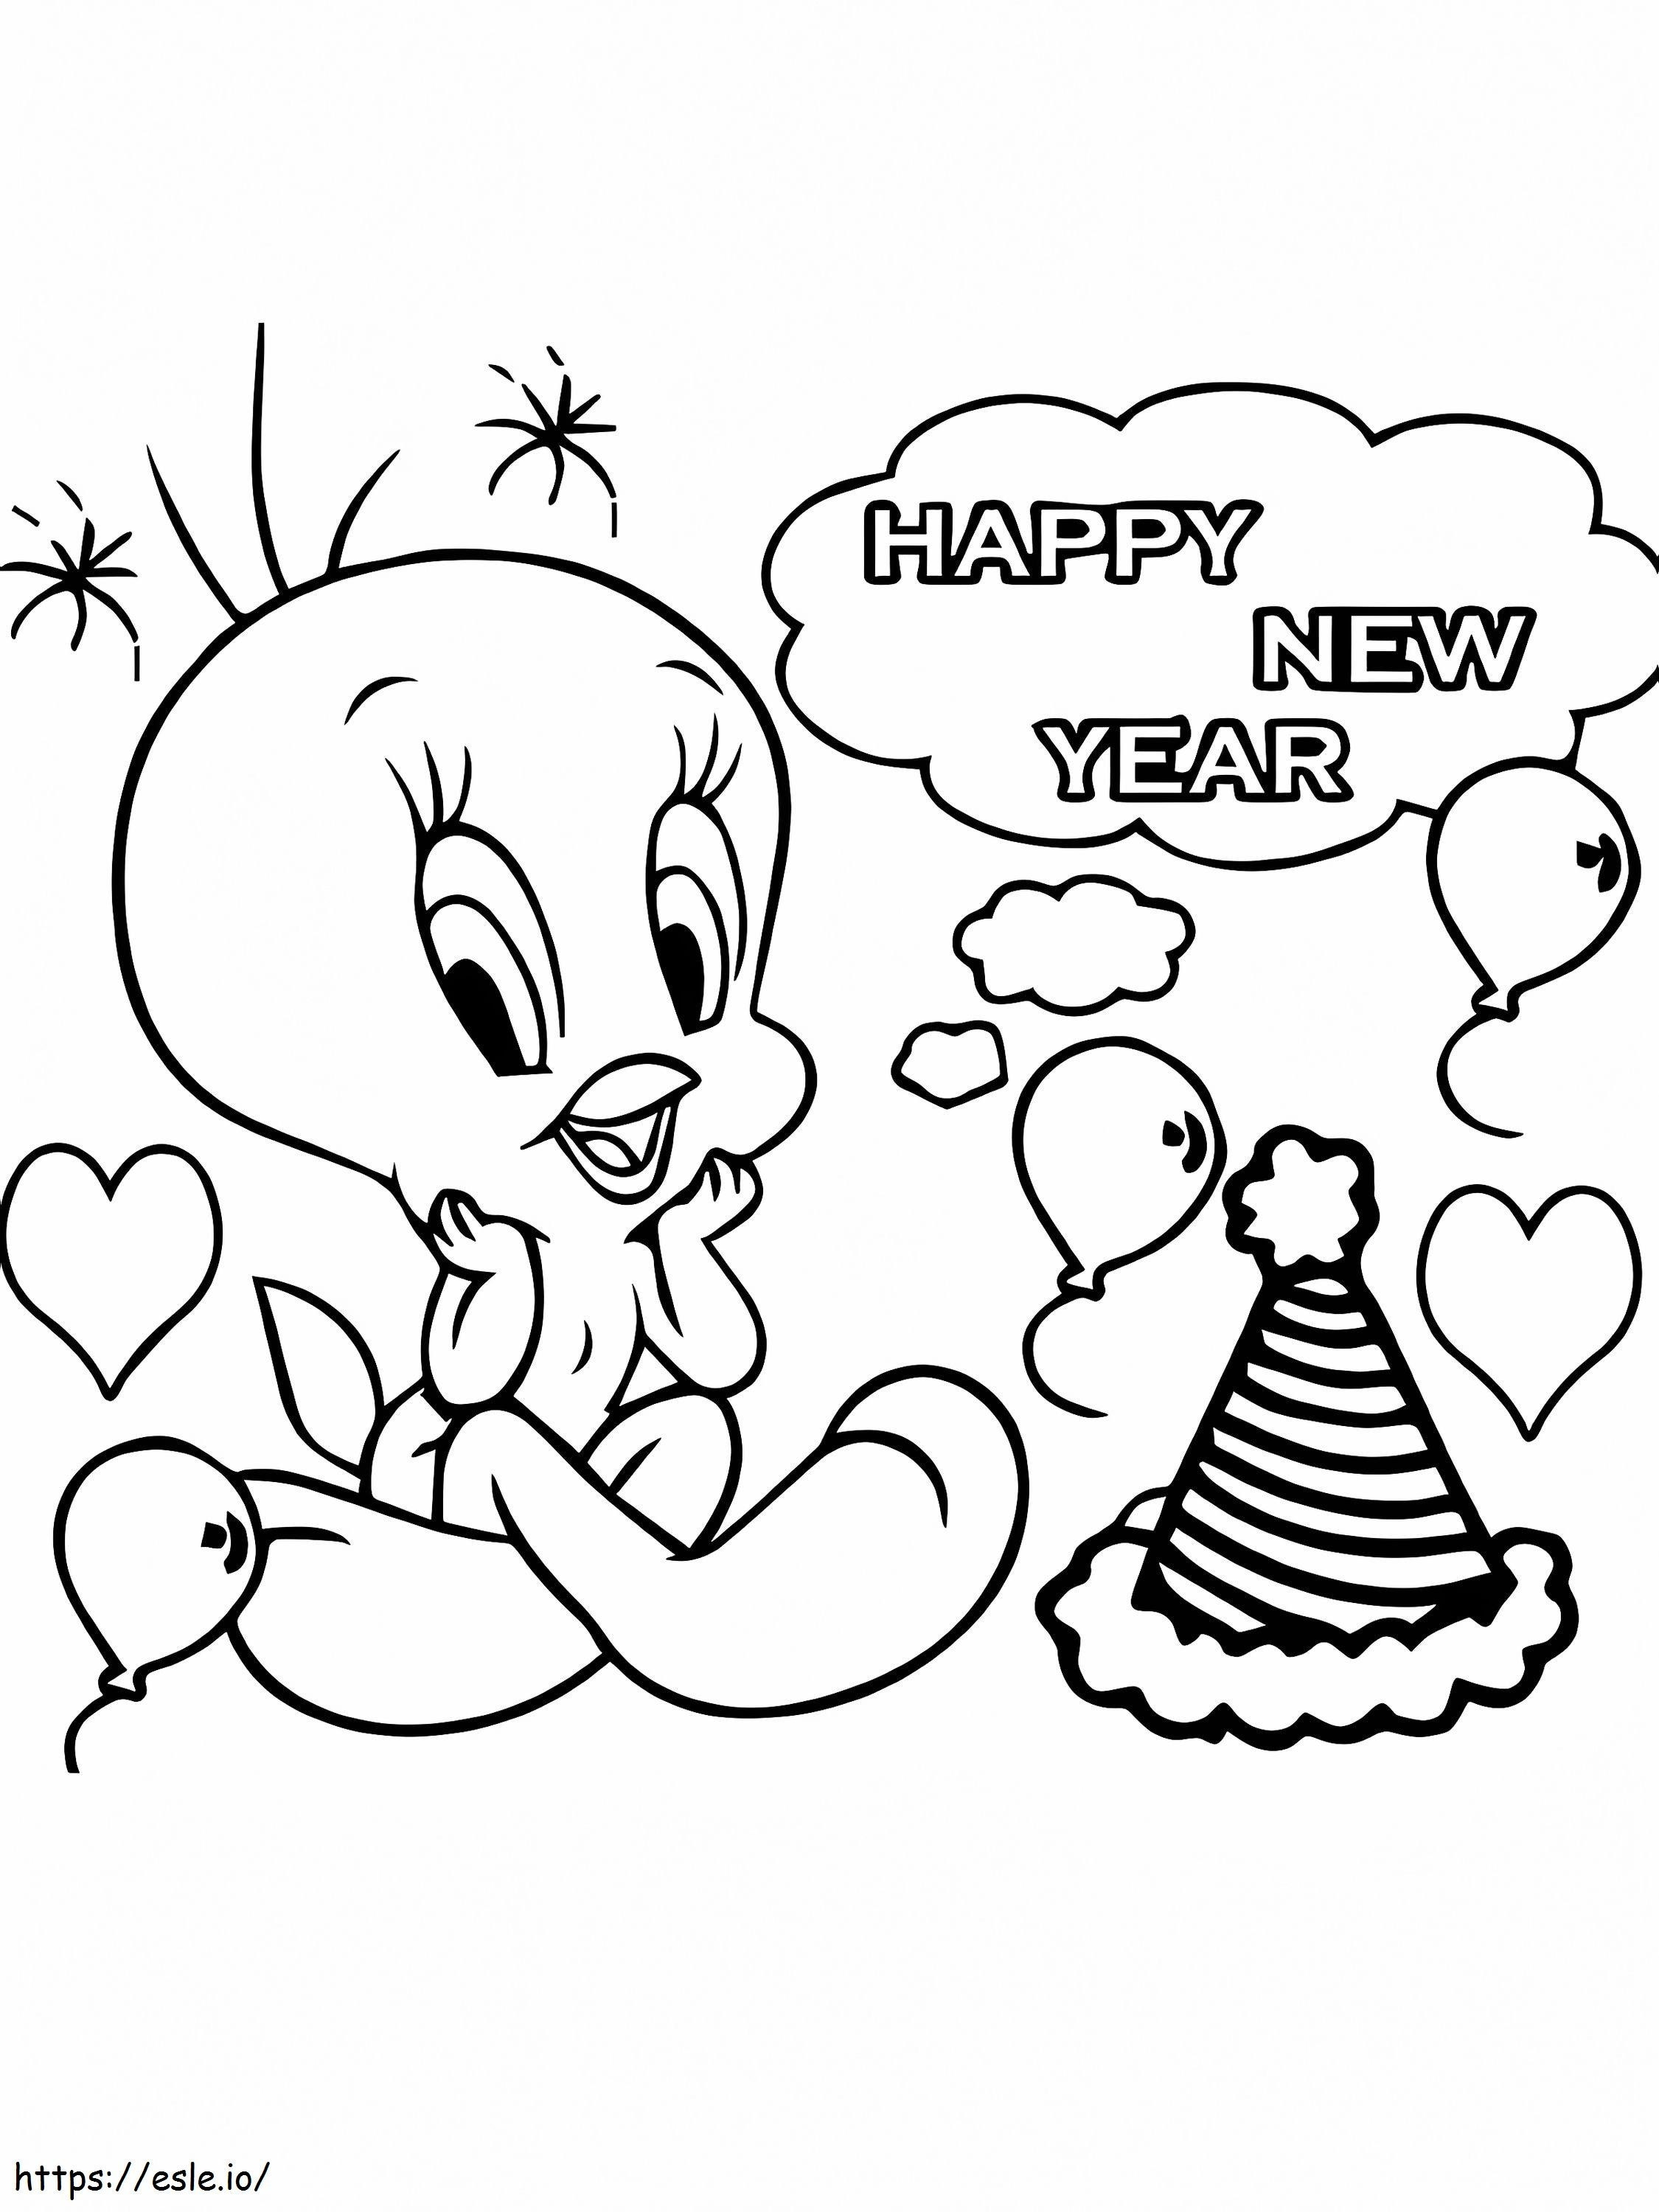 Tweety Bird And Happy New Year Coloring Page coloring page